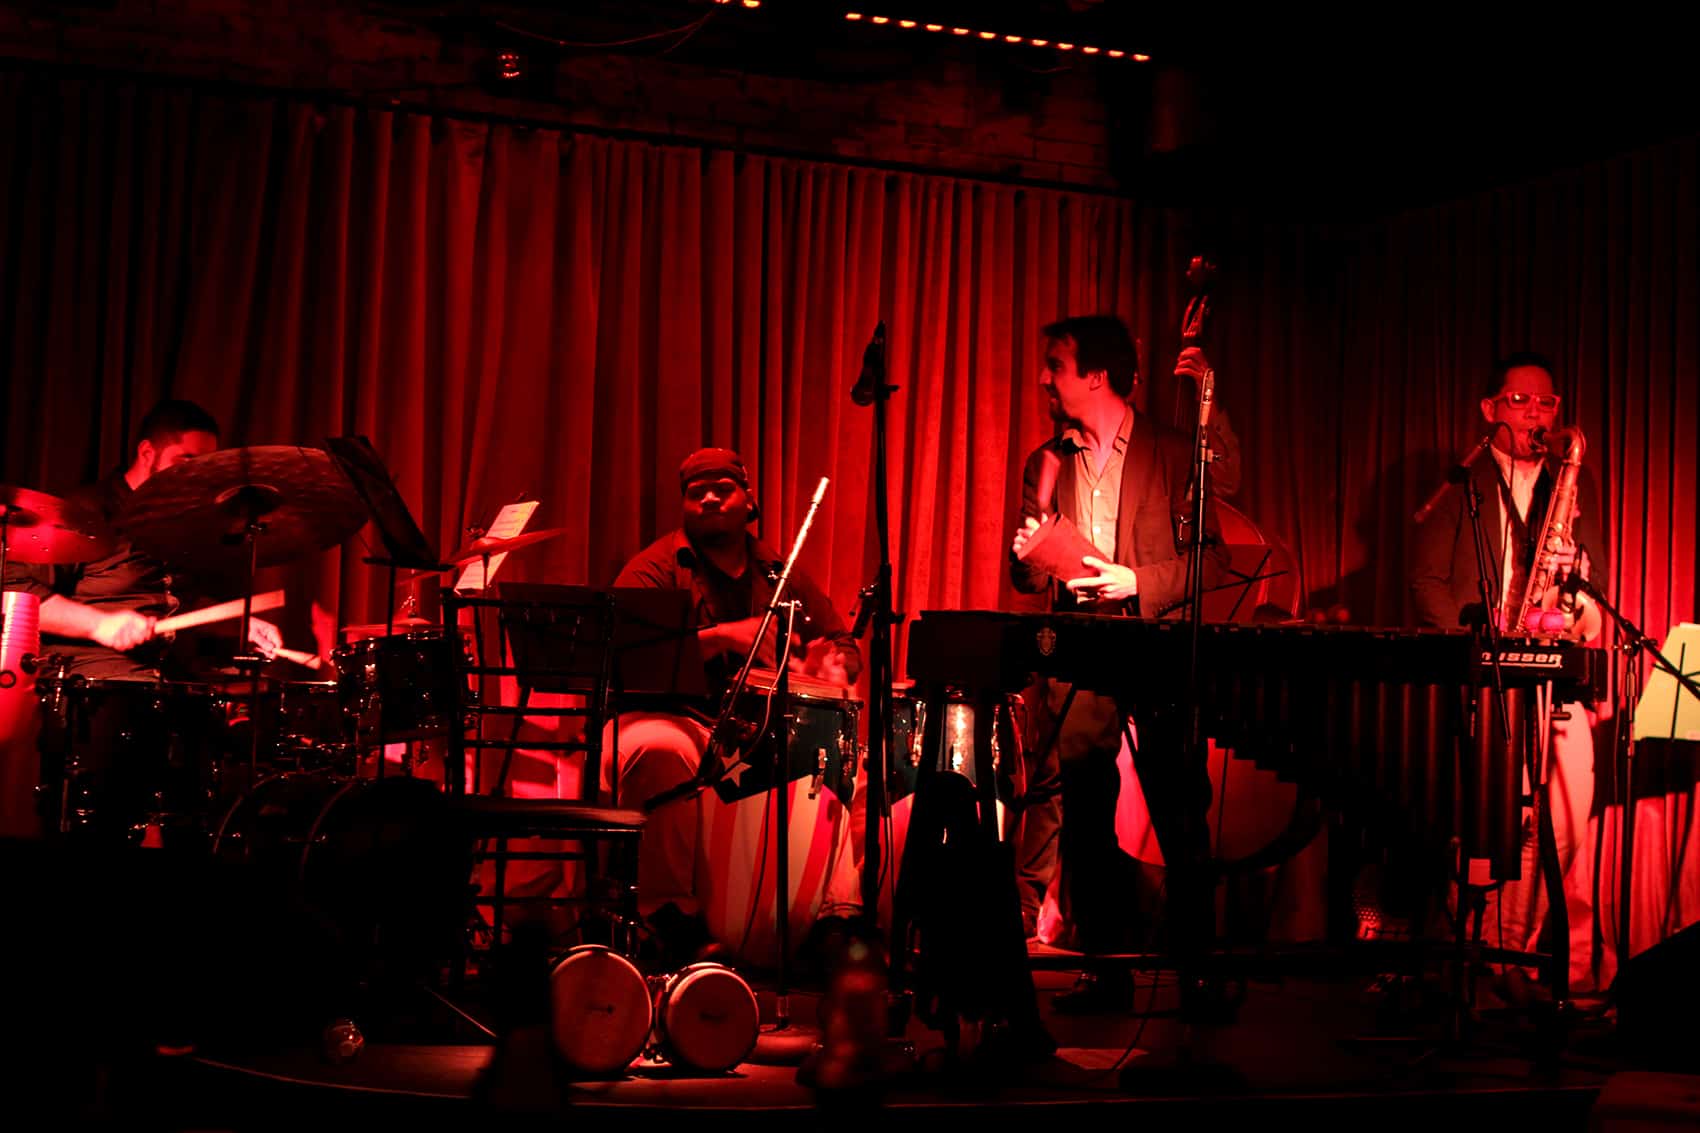 Super Mambo, a band created in 2014, performs on June 22 at the newly opened Latin jazz club Subrosa in Manhattan's fancy Meatpacking District.